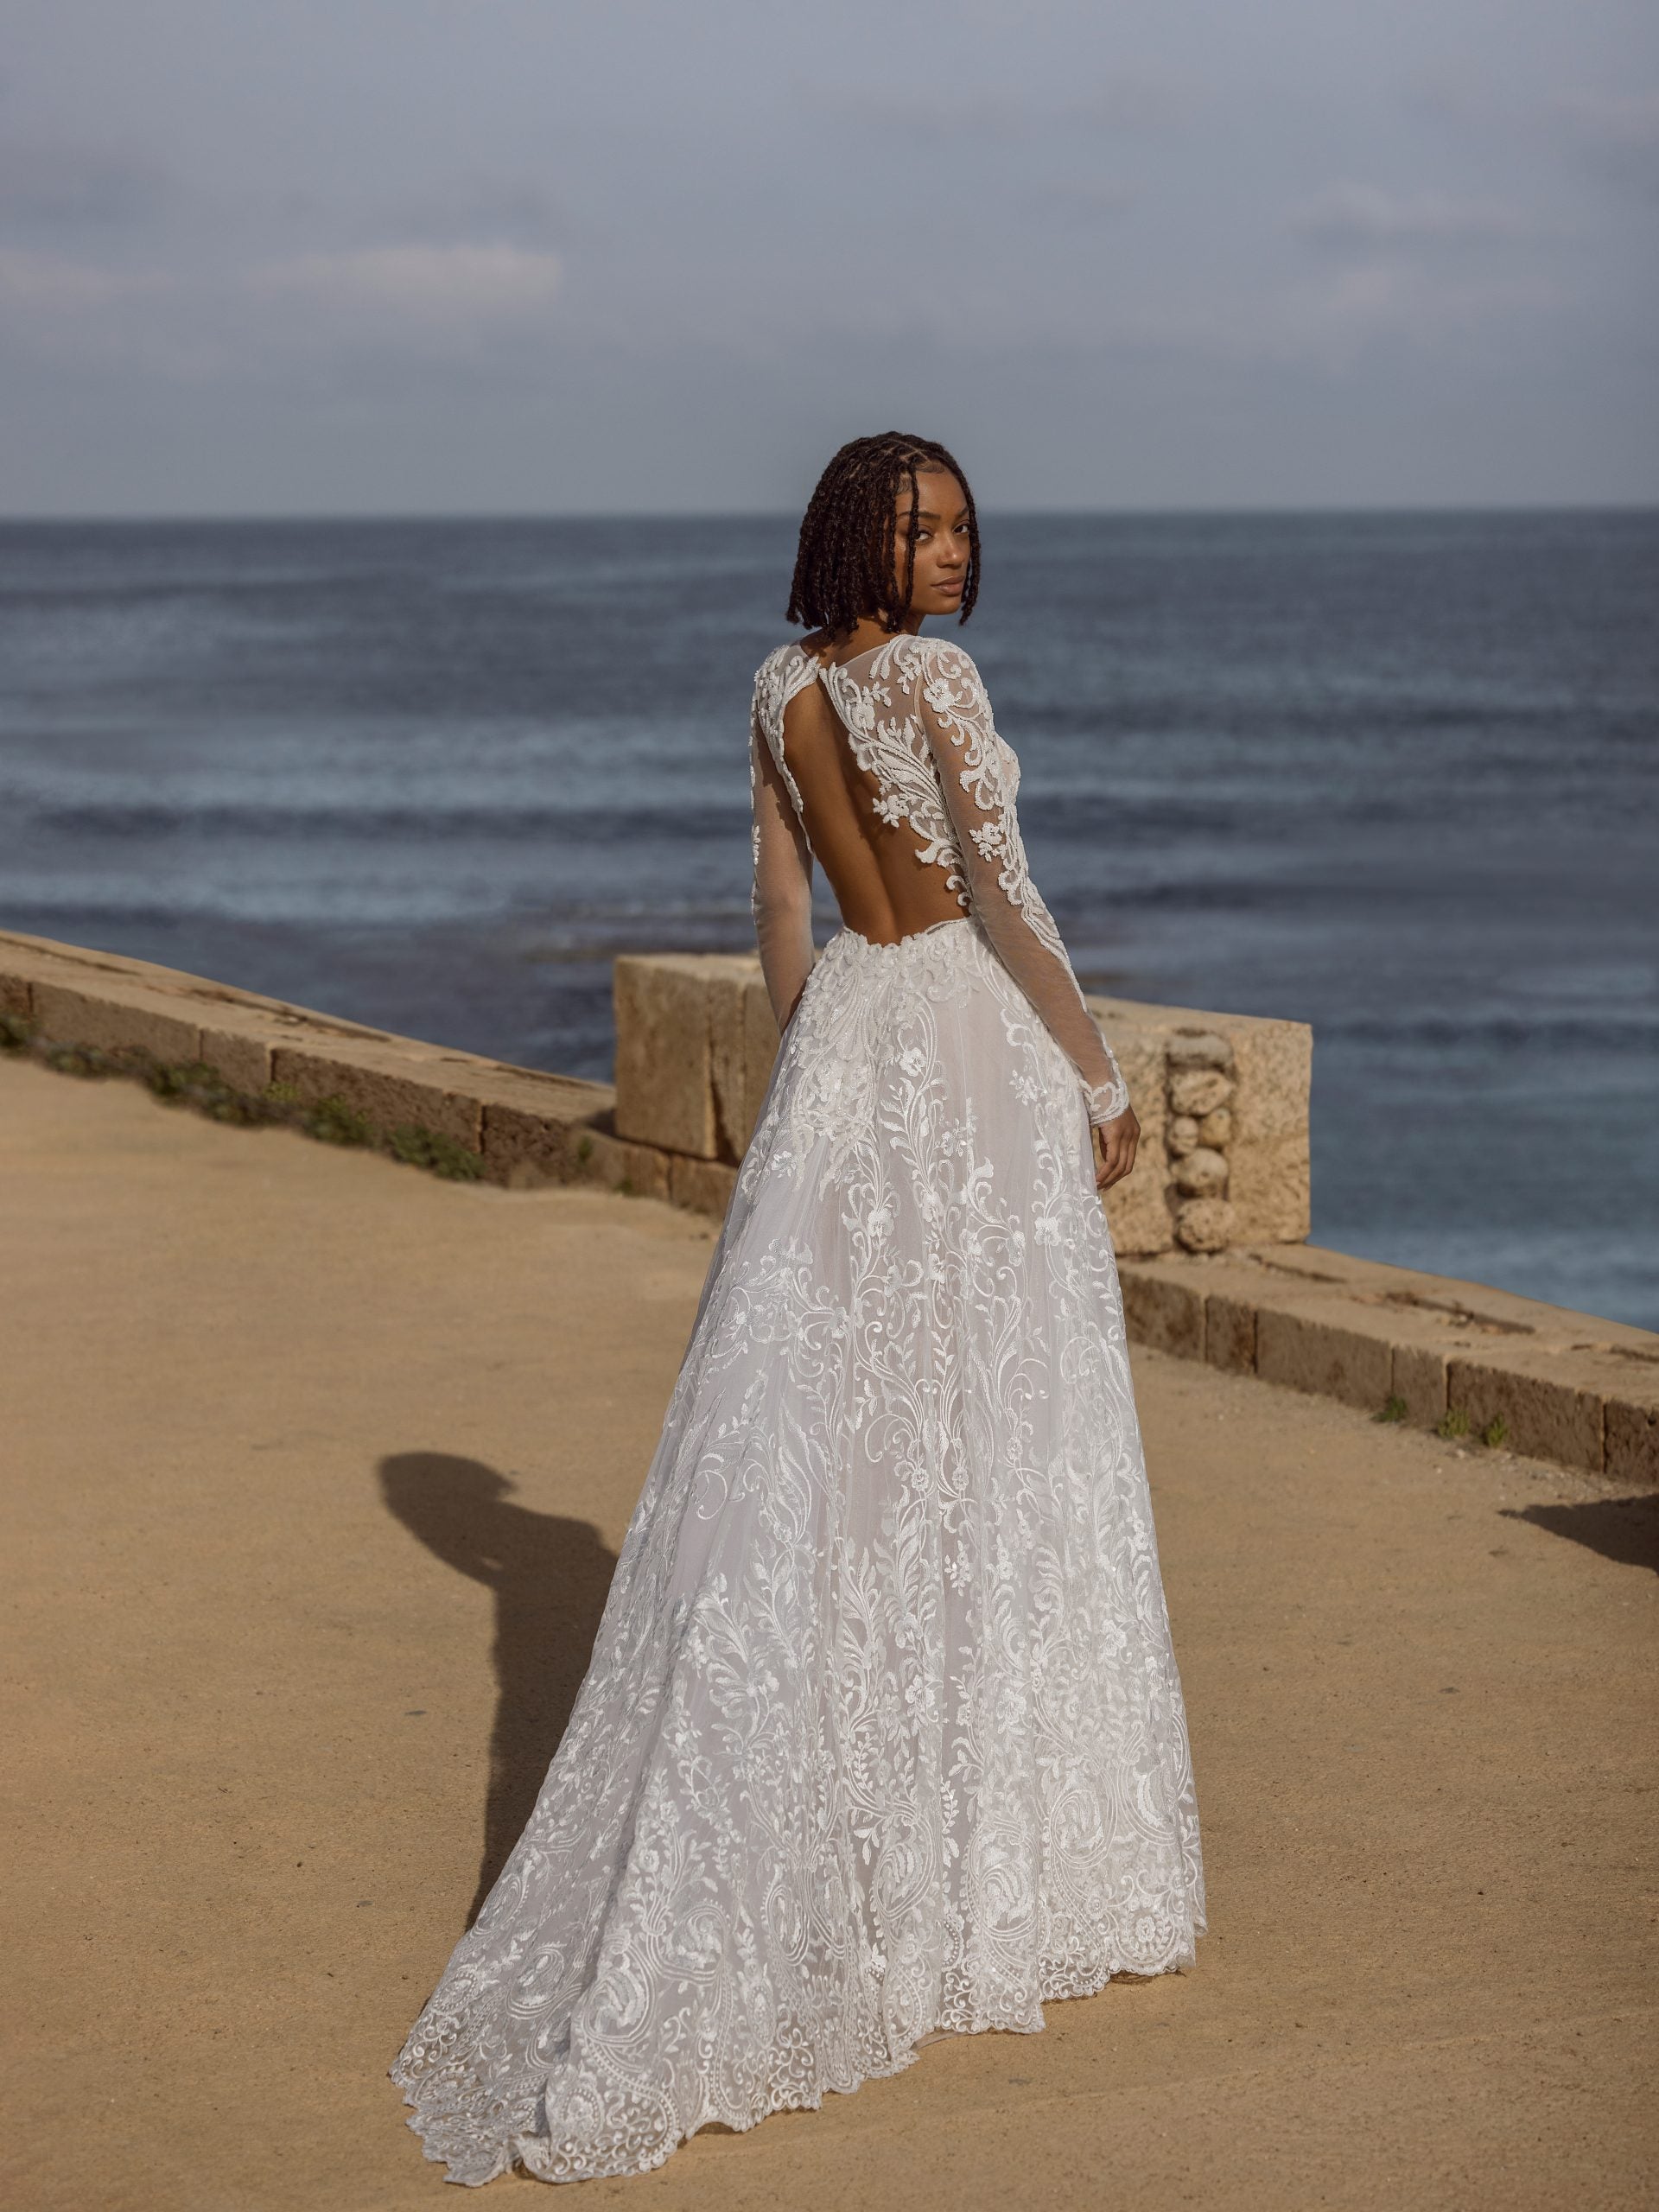 Long Sleeve Lace Ball Gown Wedding Dress With Open Back by Love by Pnina Tornai - Image 2